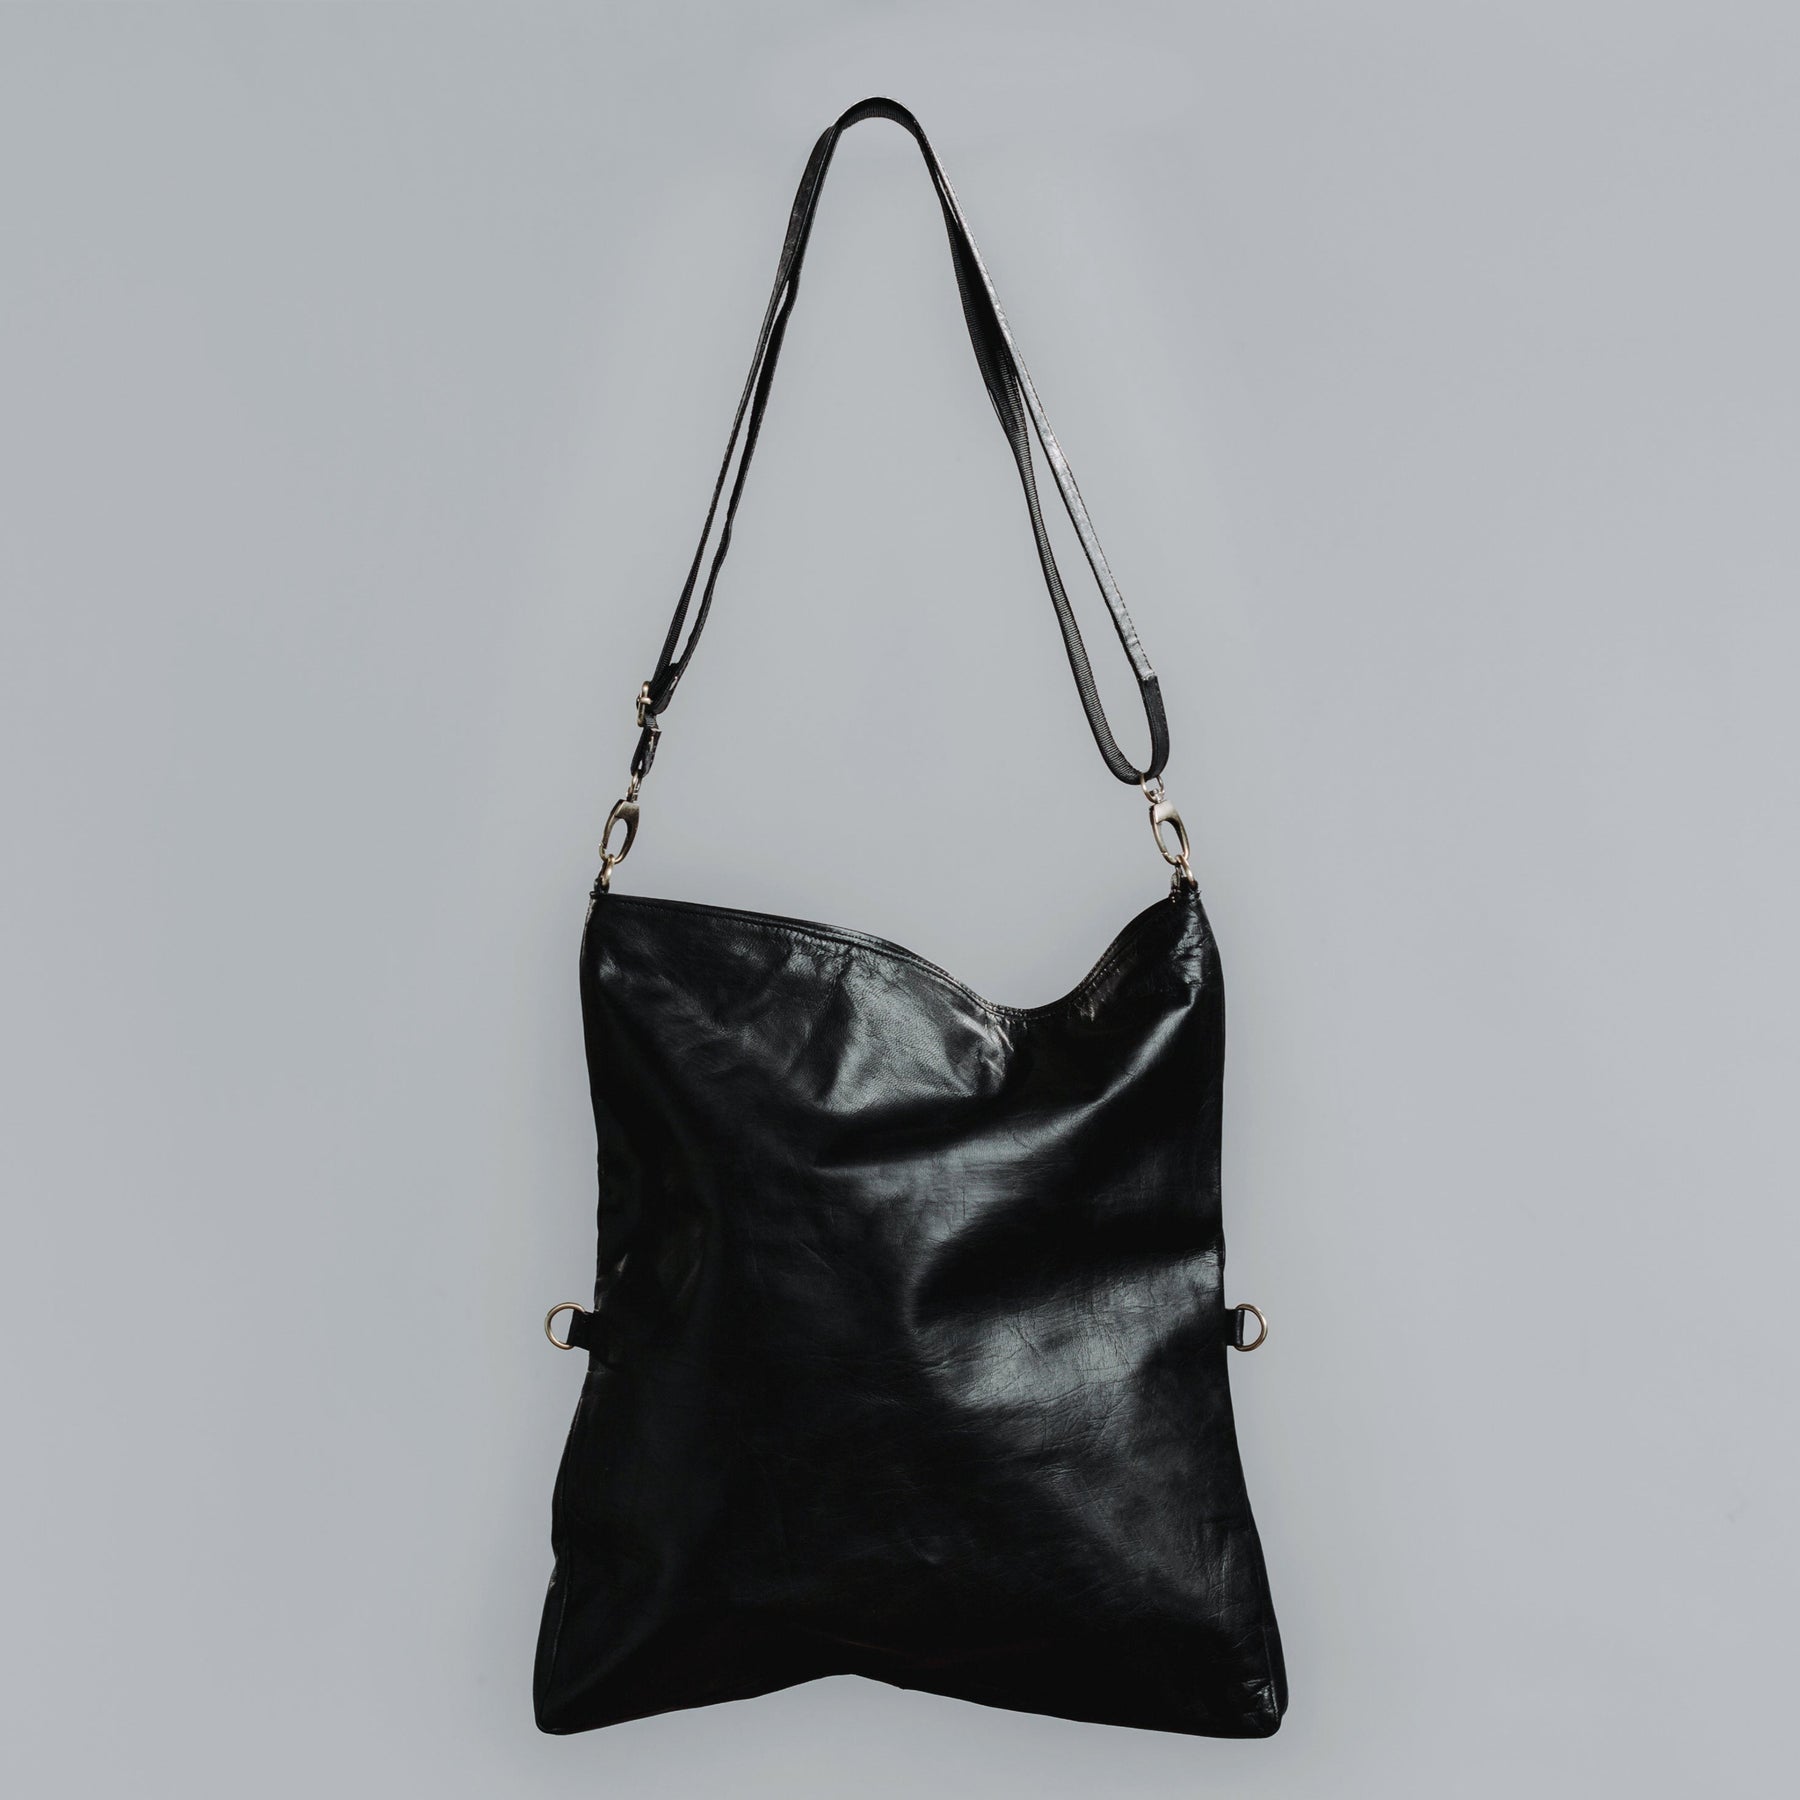 Handmade Vegetable Tanned Leather Tote Bag | Available in Tan, Black ...